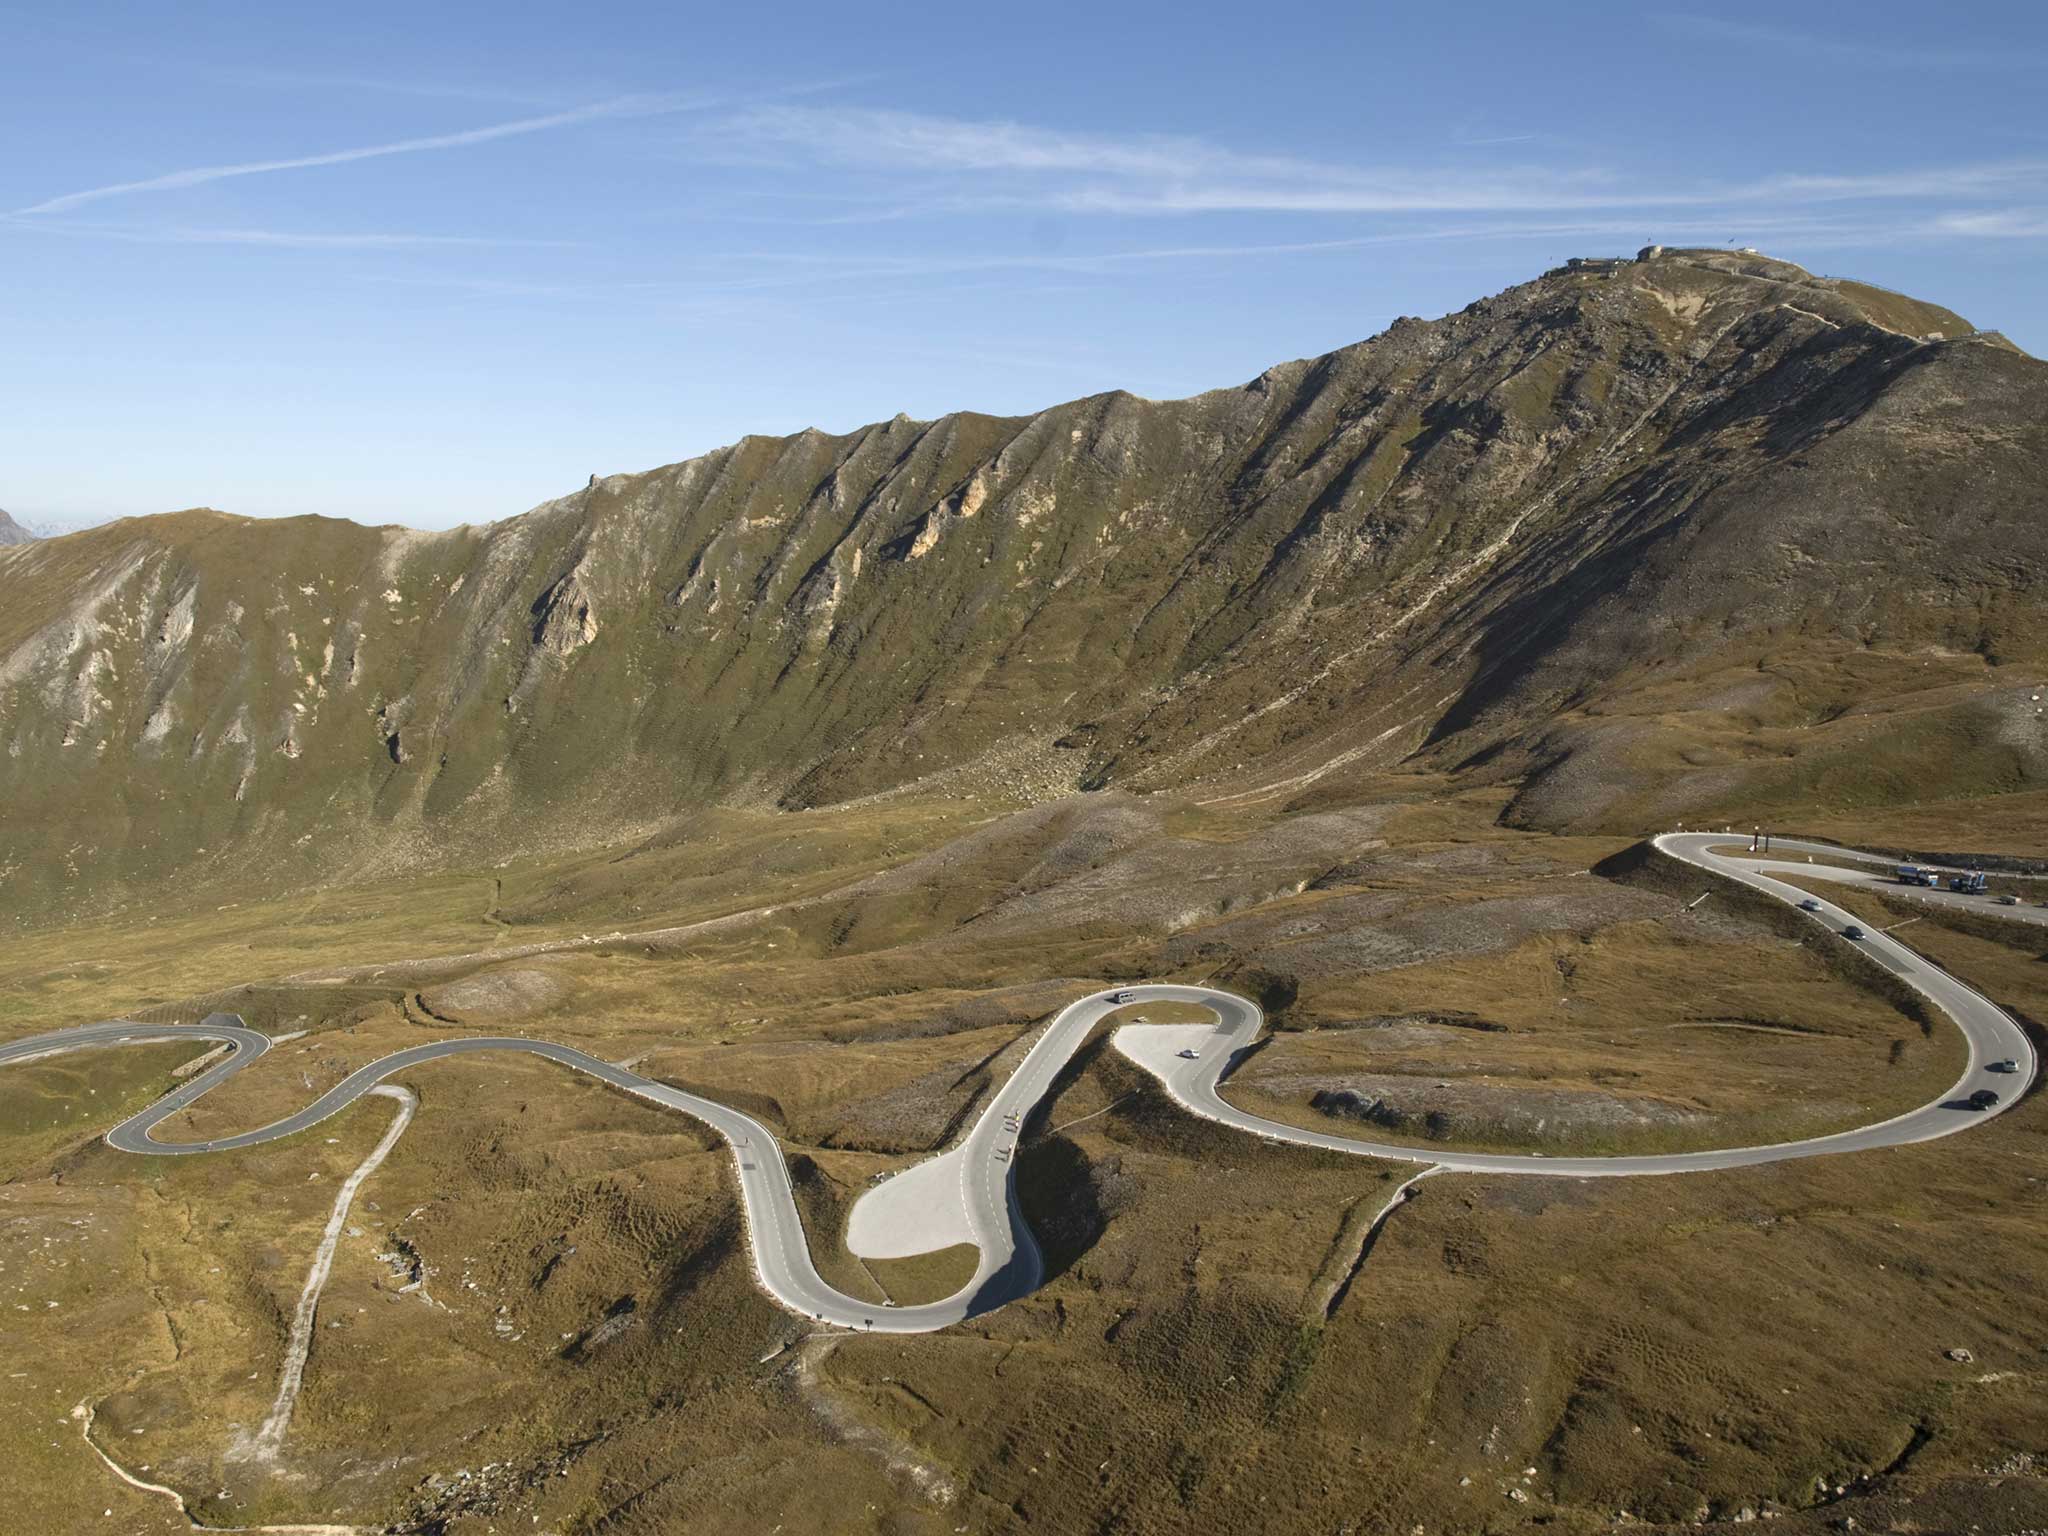 The winding road is popular with drivers for its scenic views